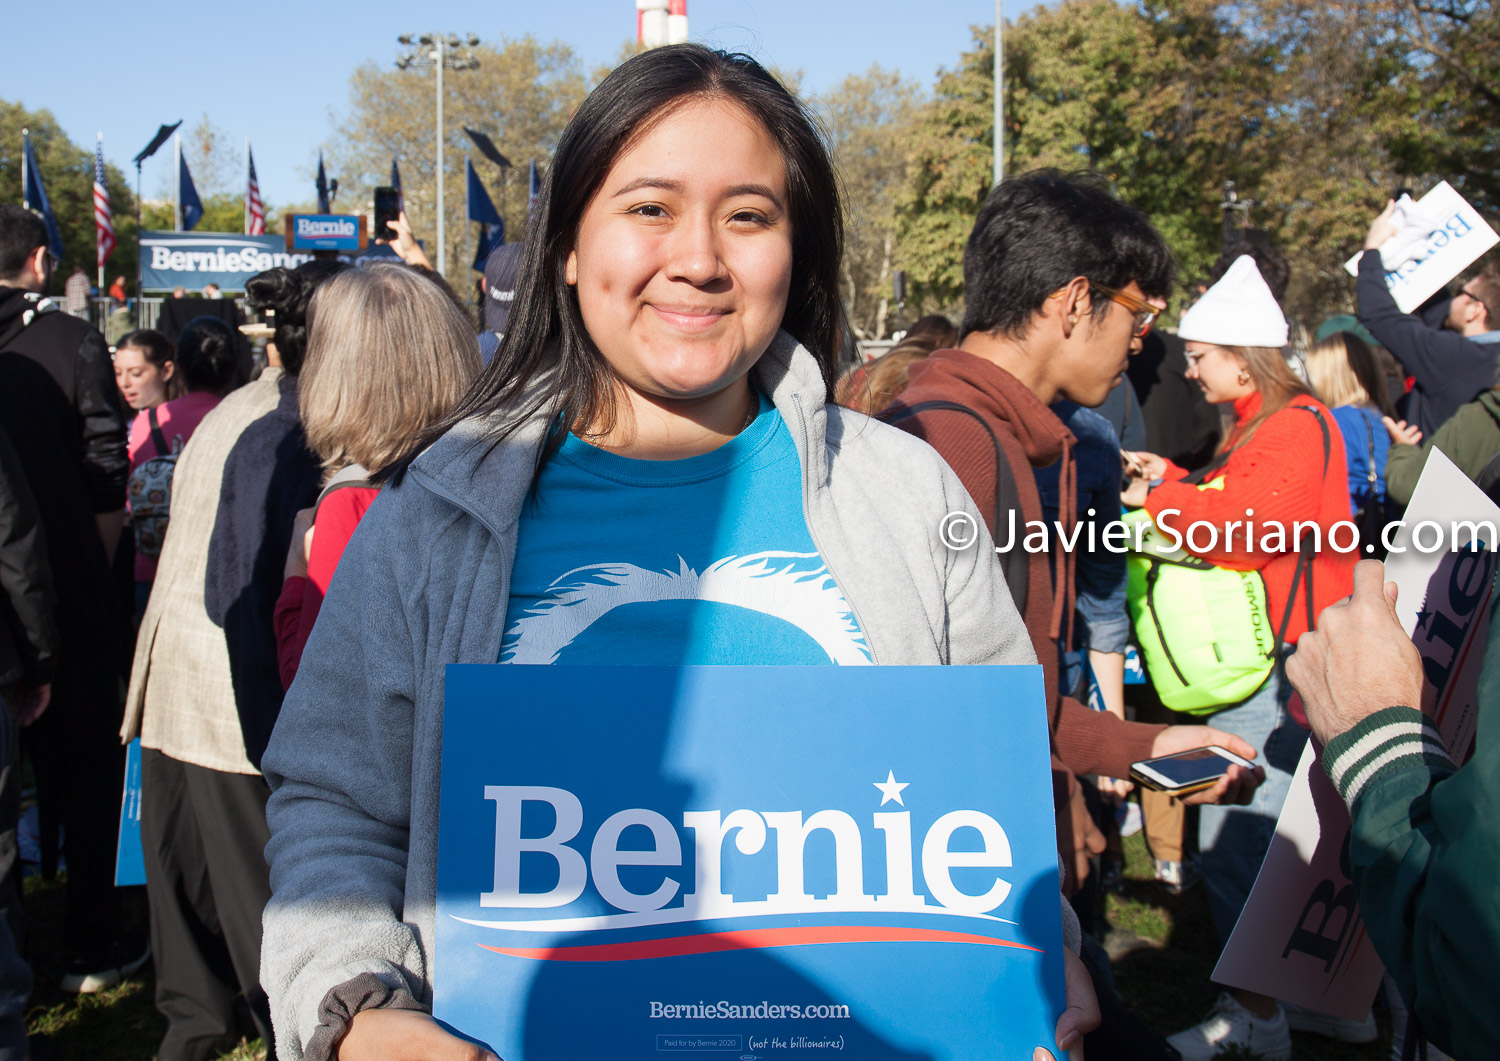 Saturday, October 19, 2019. Queens, New York City - Bernie Sanders had a rally in Queens today. Almost 26 thousand people attended the event. Photo by Javier Soriano/www.JavierSoriano.com